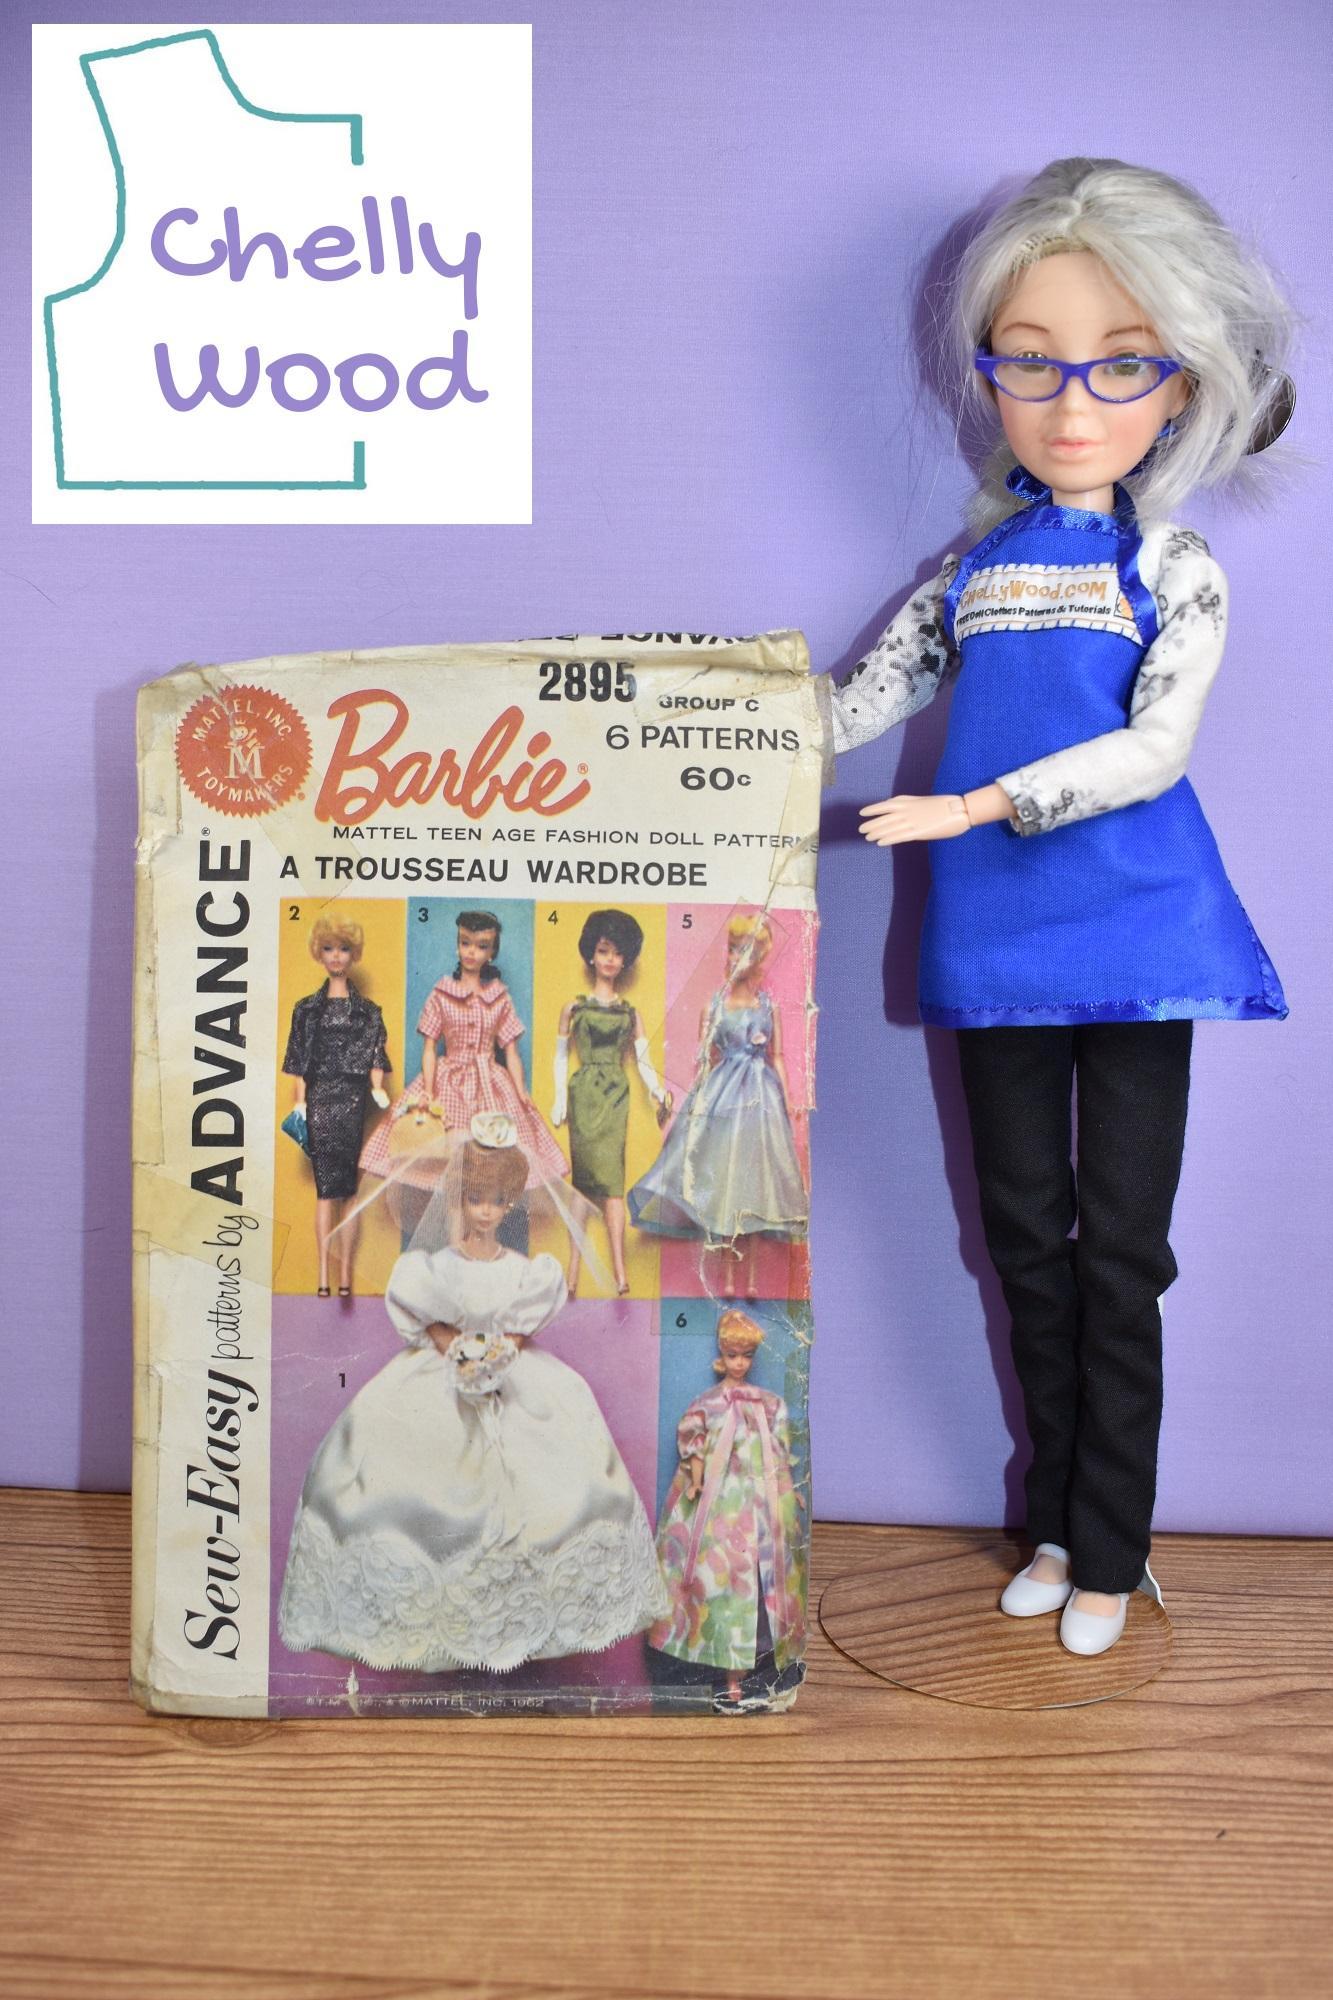 Here we see the Chelly Wood doll (a Spin Master Liv doll that has been re-envisioned) holding up the Sew-Easy Patterns by Advance vintage Mattel, Inc. Toymakers Barbie doll clothes sewing pattern #2895. The topic of today